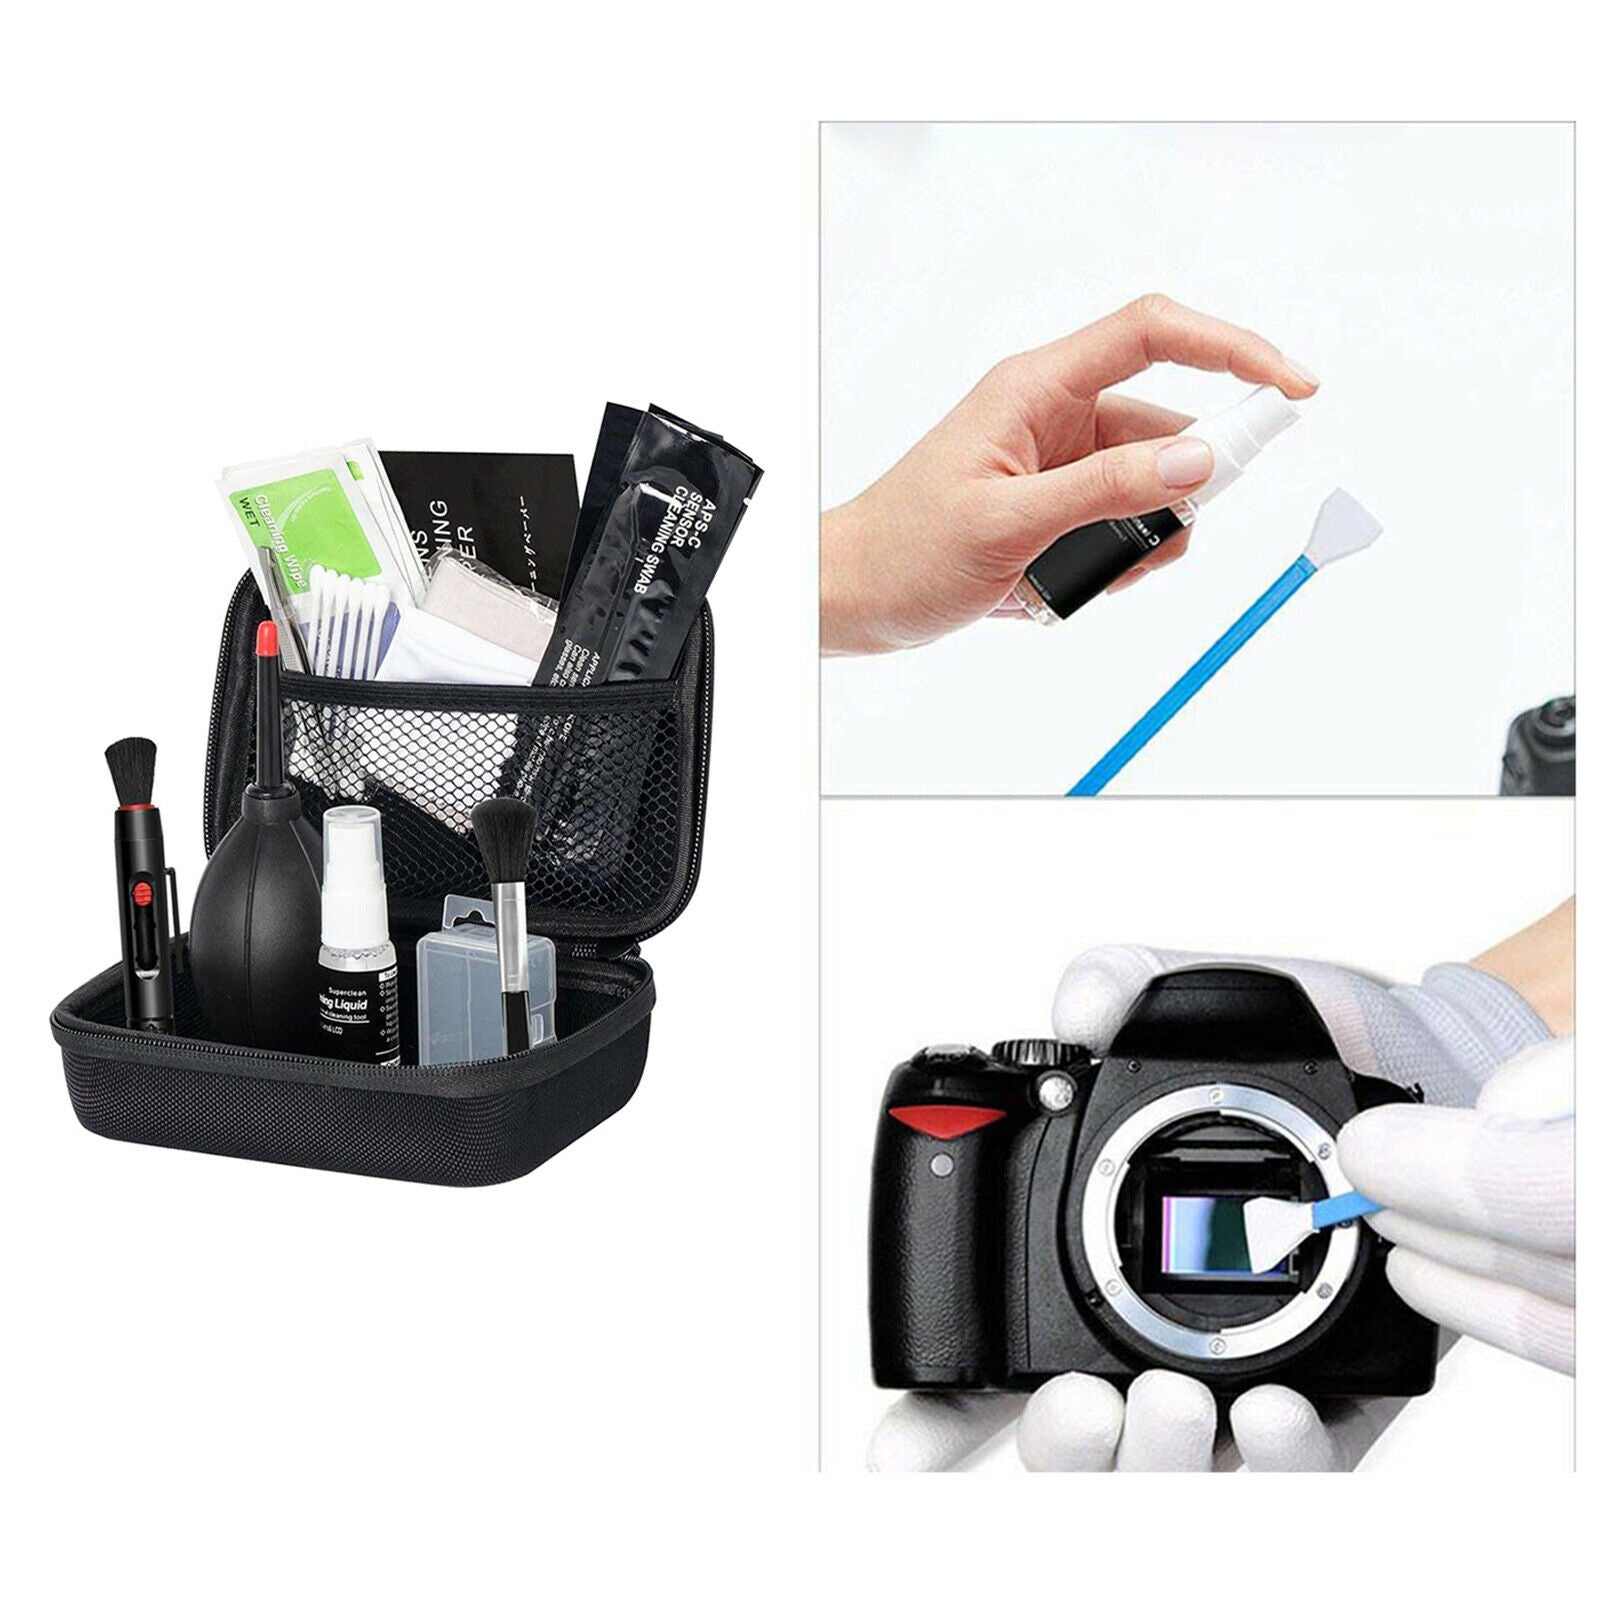 Camera Cleaning Kit for DSLR Cameras Swabs Brush APS-C From